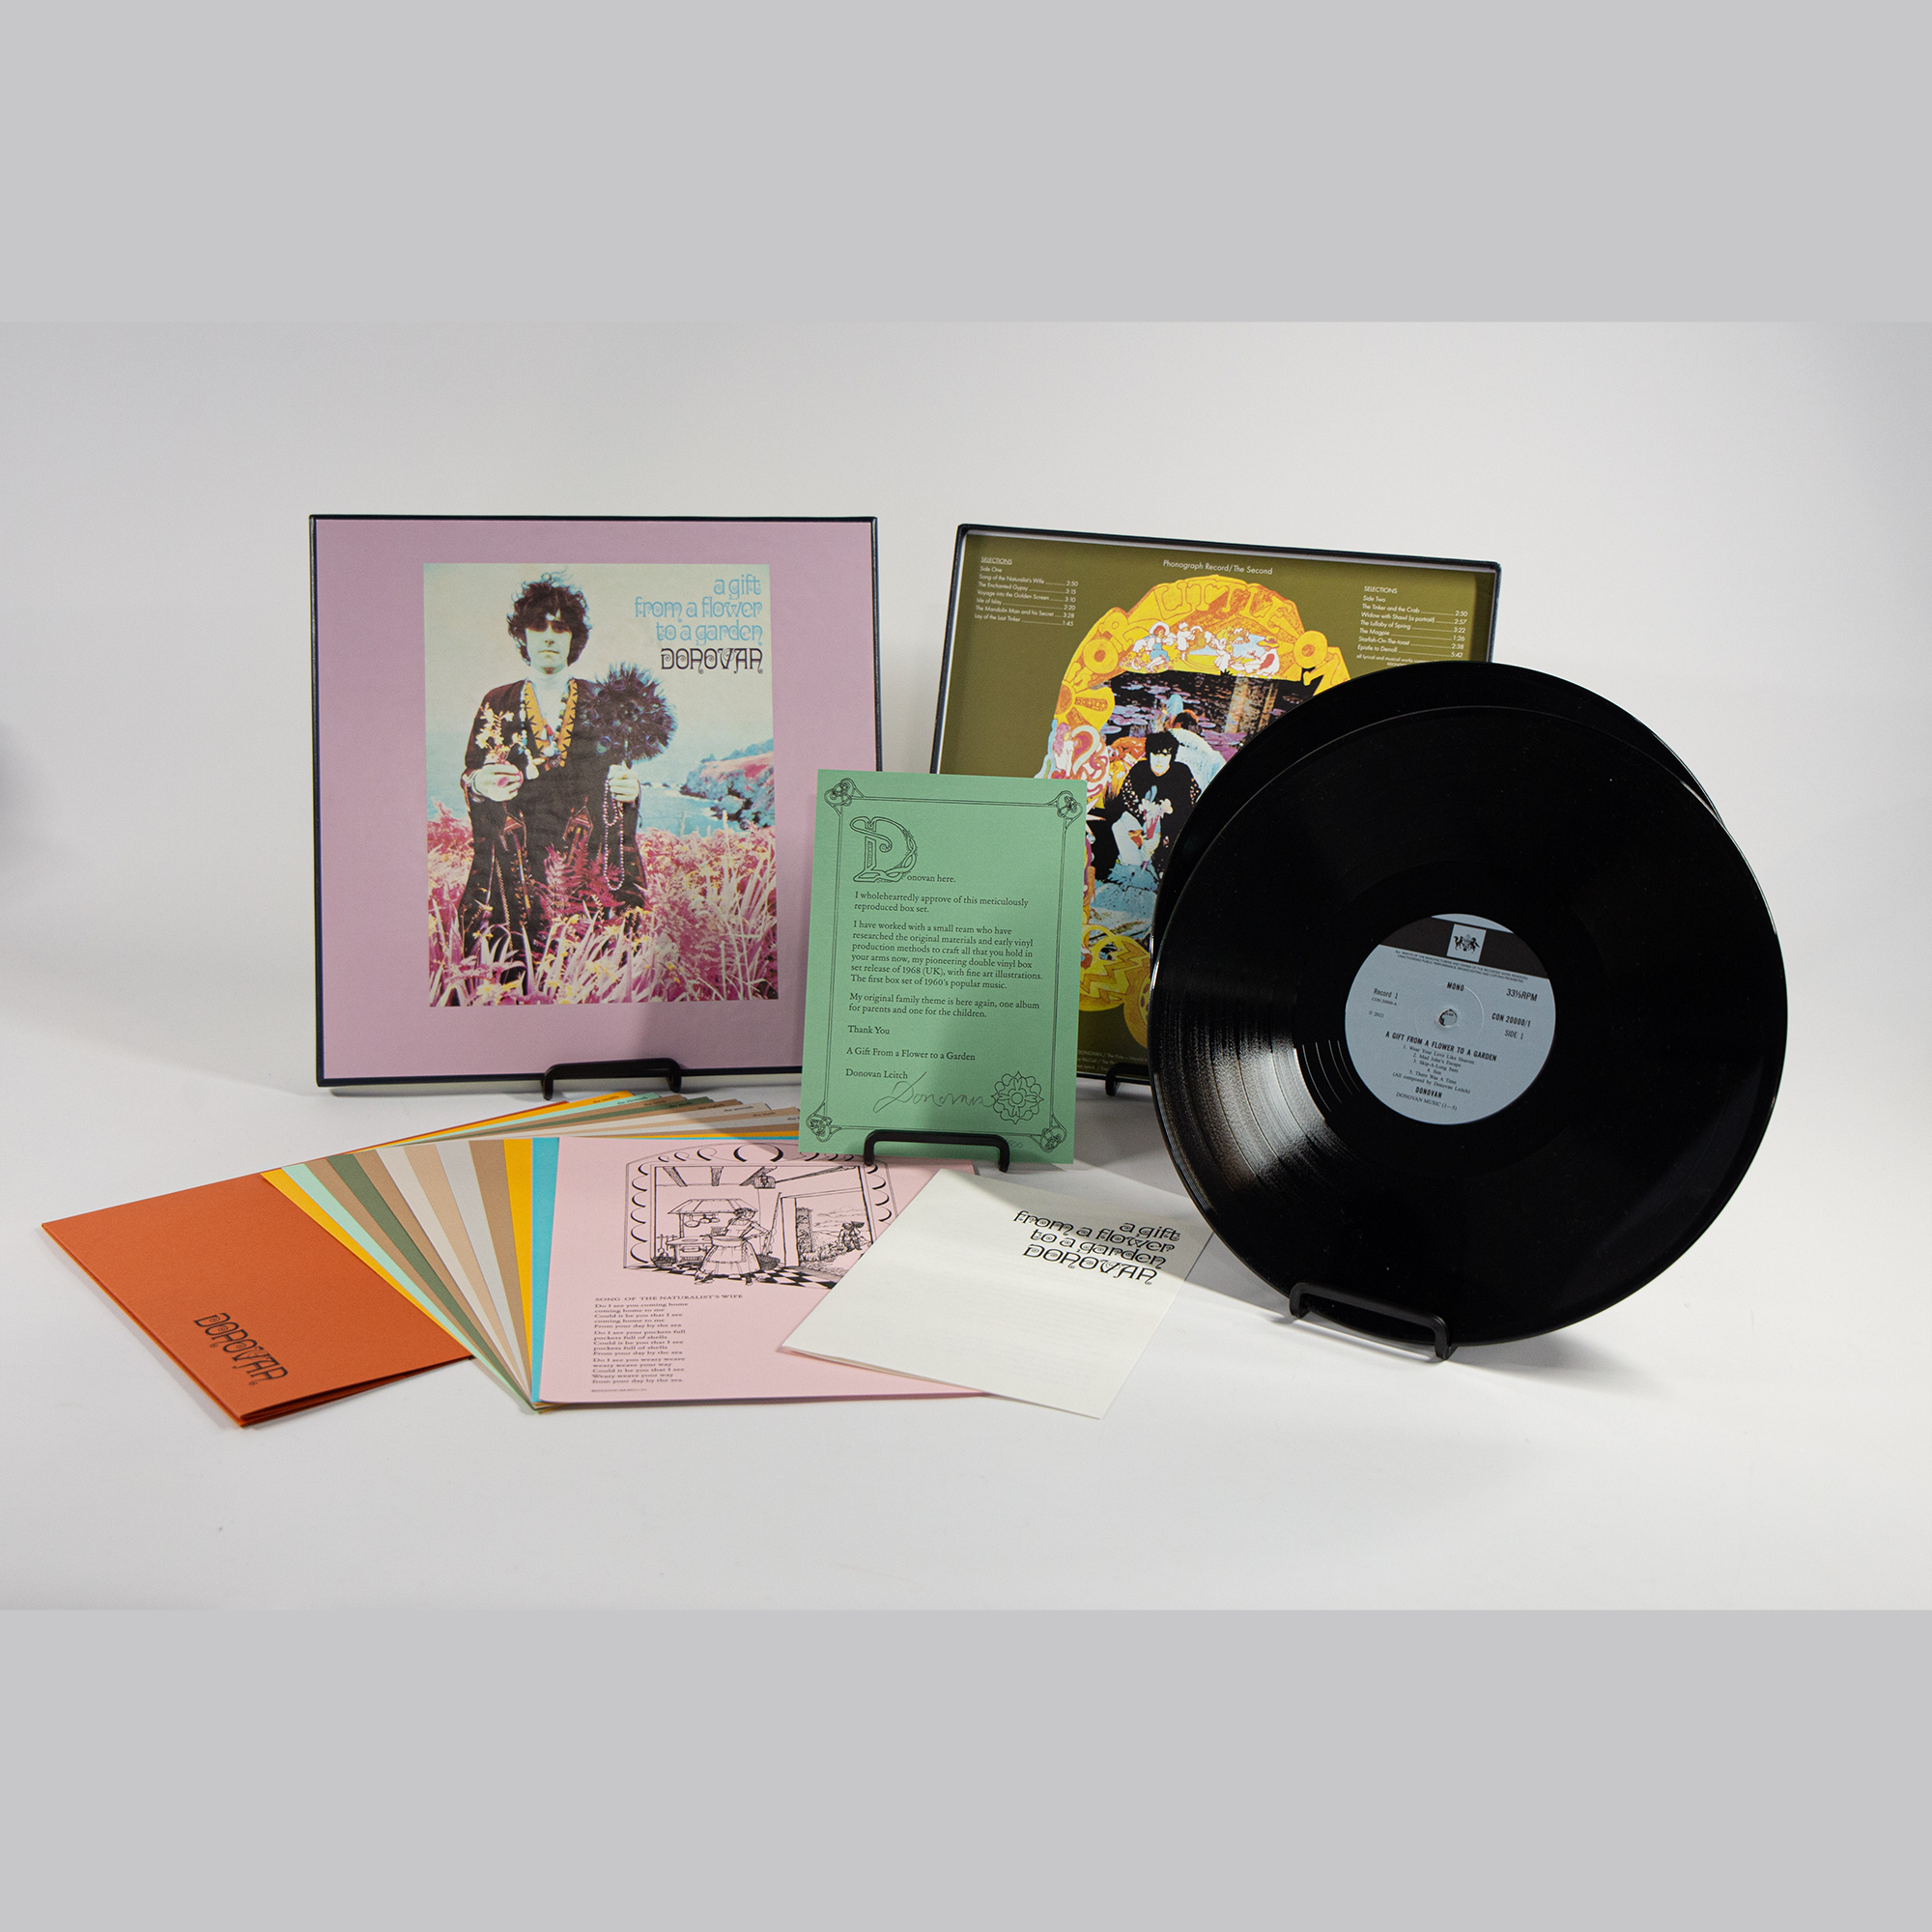 Donovan - A Gift from a Flower to a Garden: Deluxe Signed Box Set